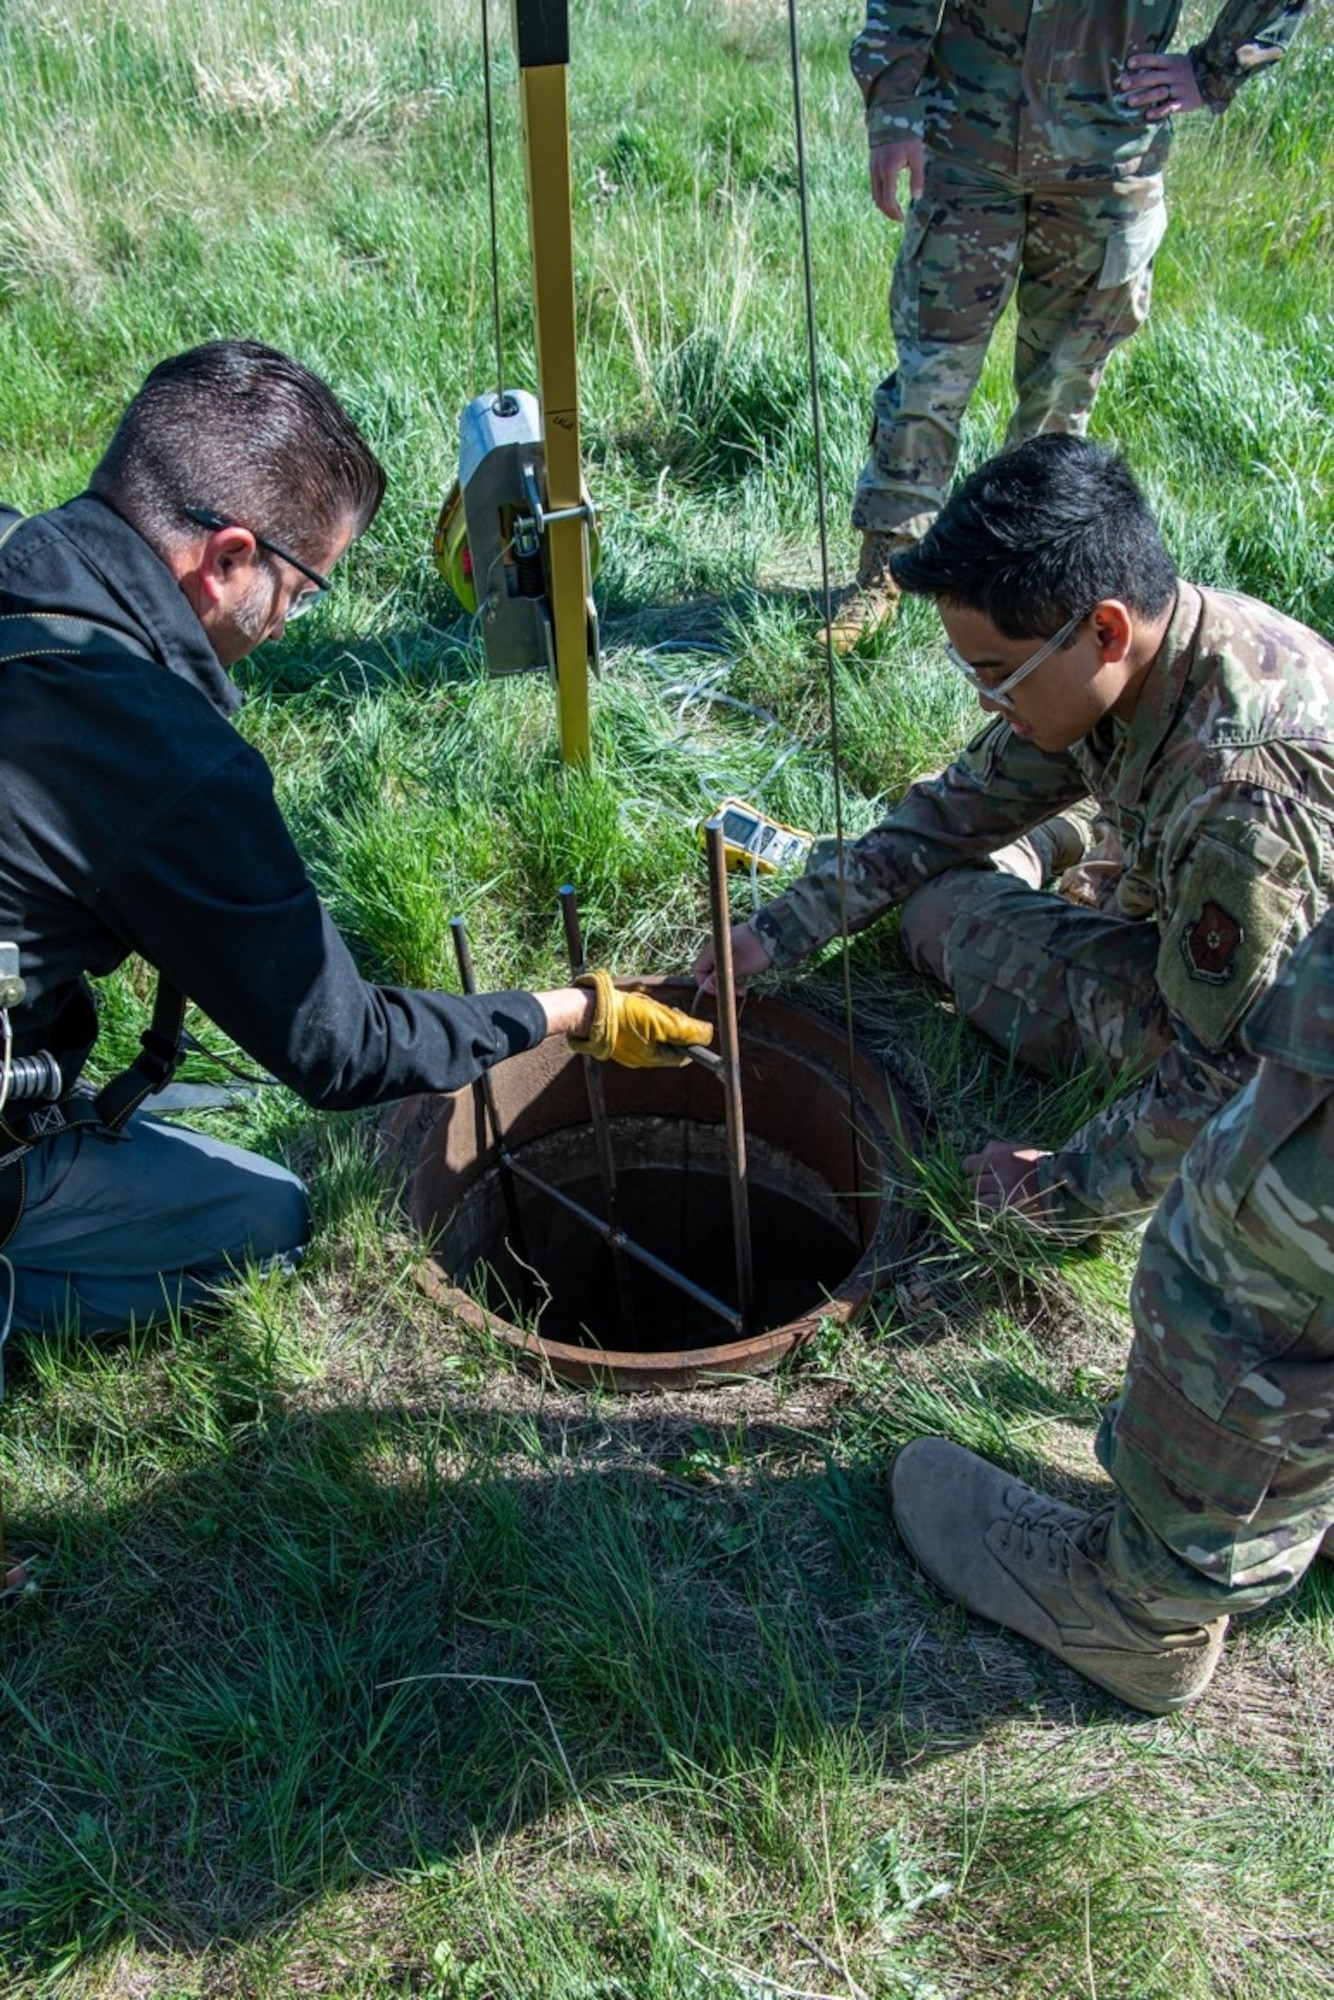 Ken Long, an engineering equipment operator assigned to the 28th Civil Engineer Squadron, and Airman 1st Class Joshua Tabasa, a heavy equipment operator assigned to the 28th Civil Squadron, lower equipment down into a confined space on Ellsworth Air Force, S.D., May 18, 2021.